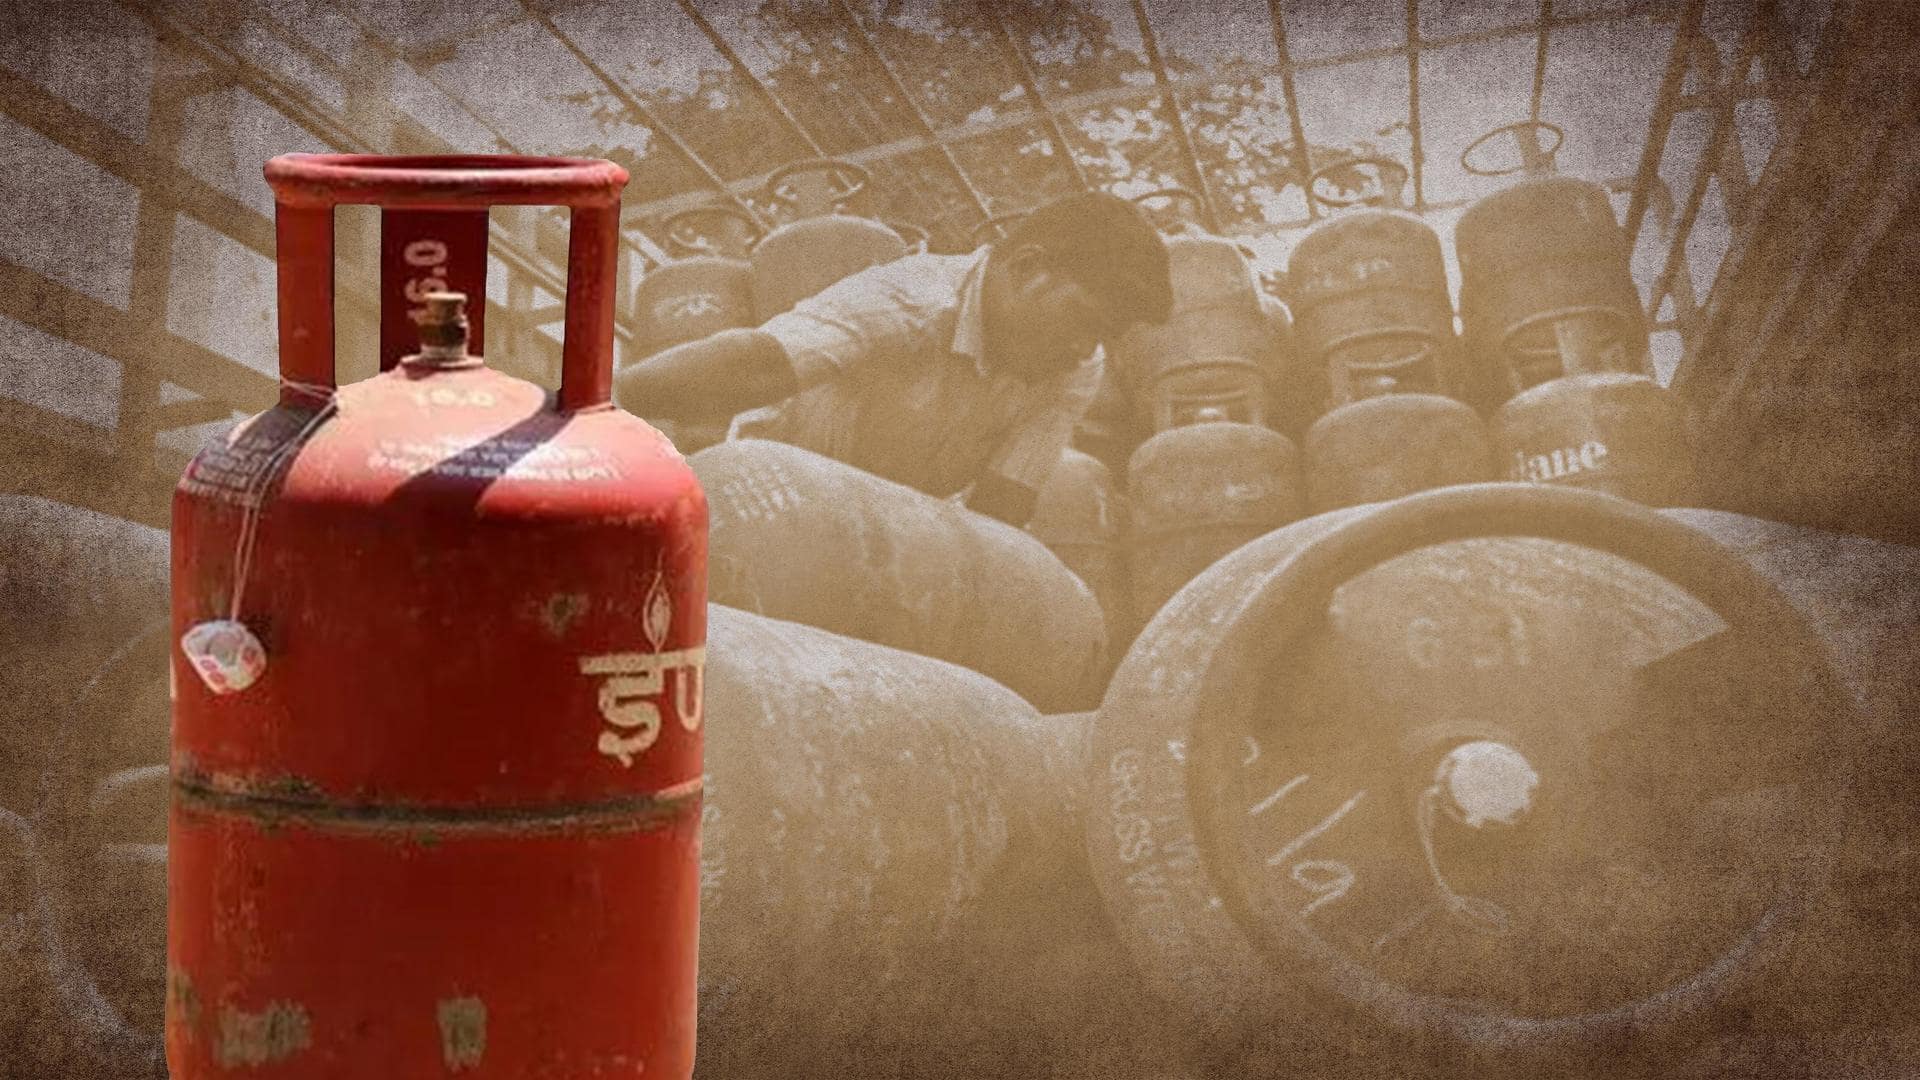 Commercial LPG cylinder prices slashed by Rs. 83.50